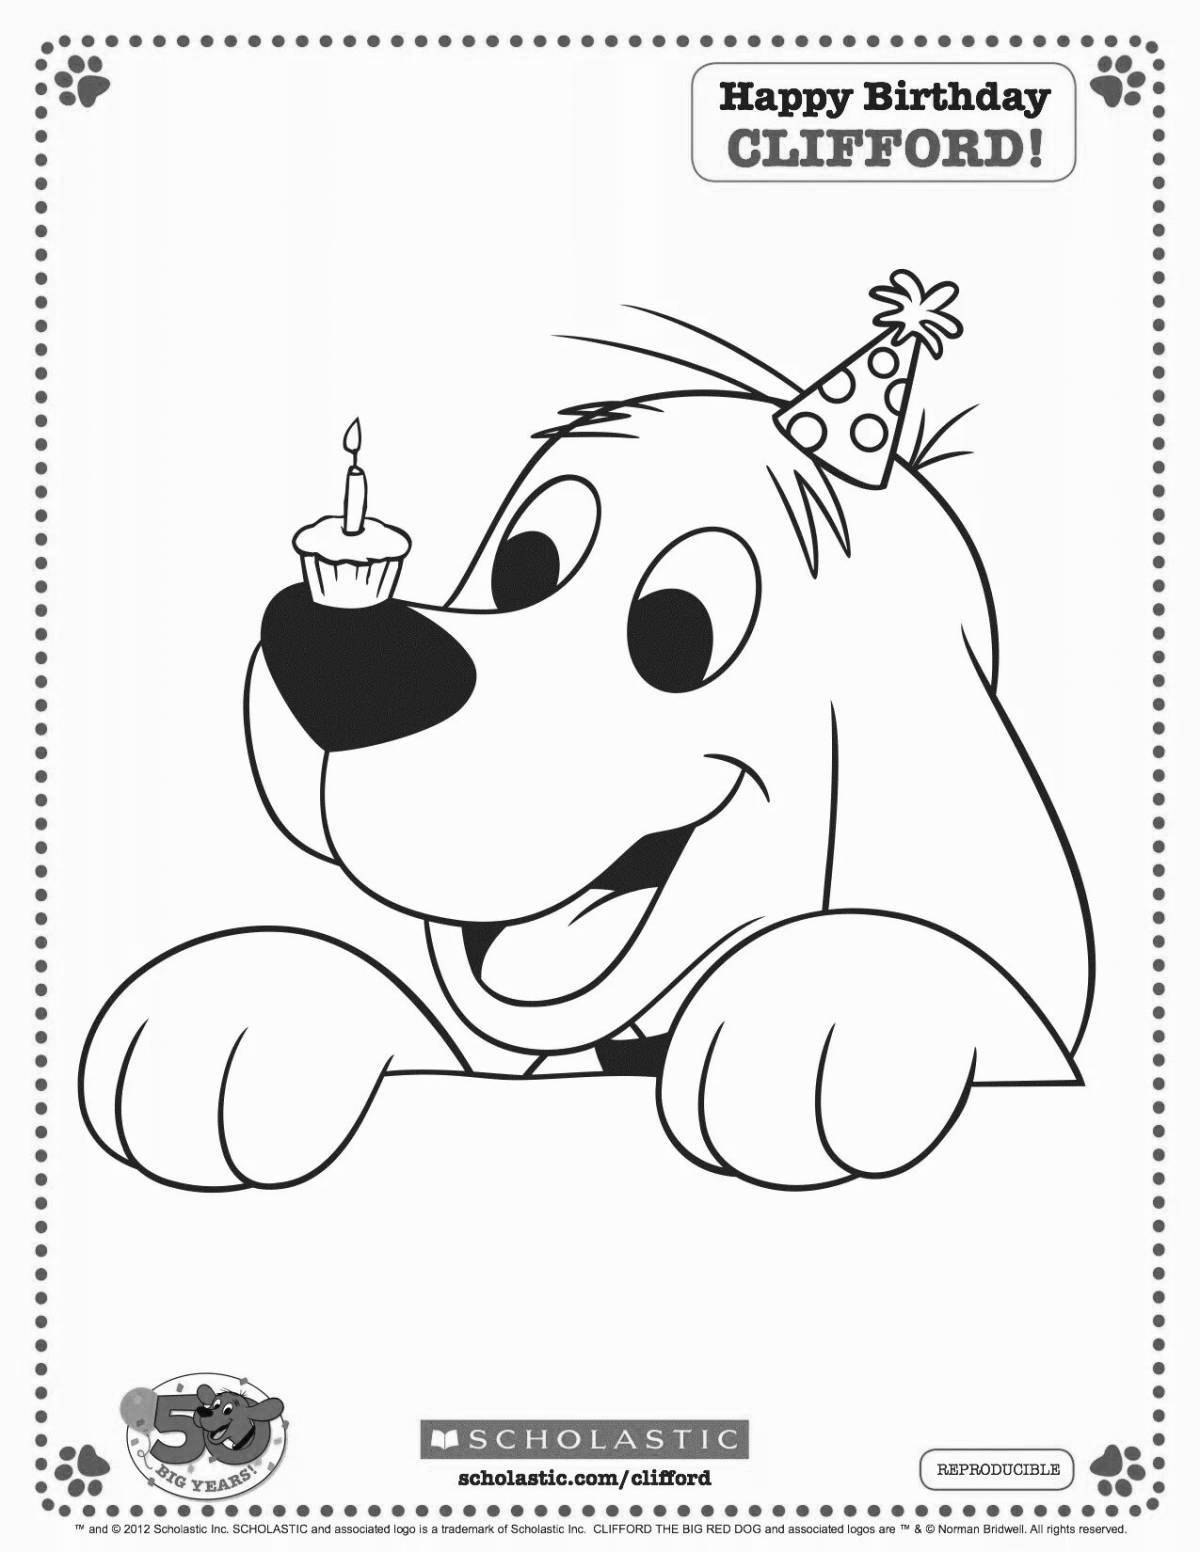 Fascinating Clifford coloring book